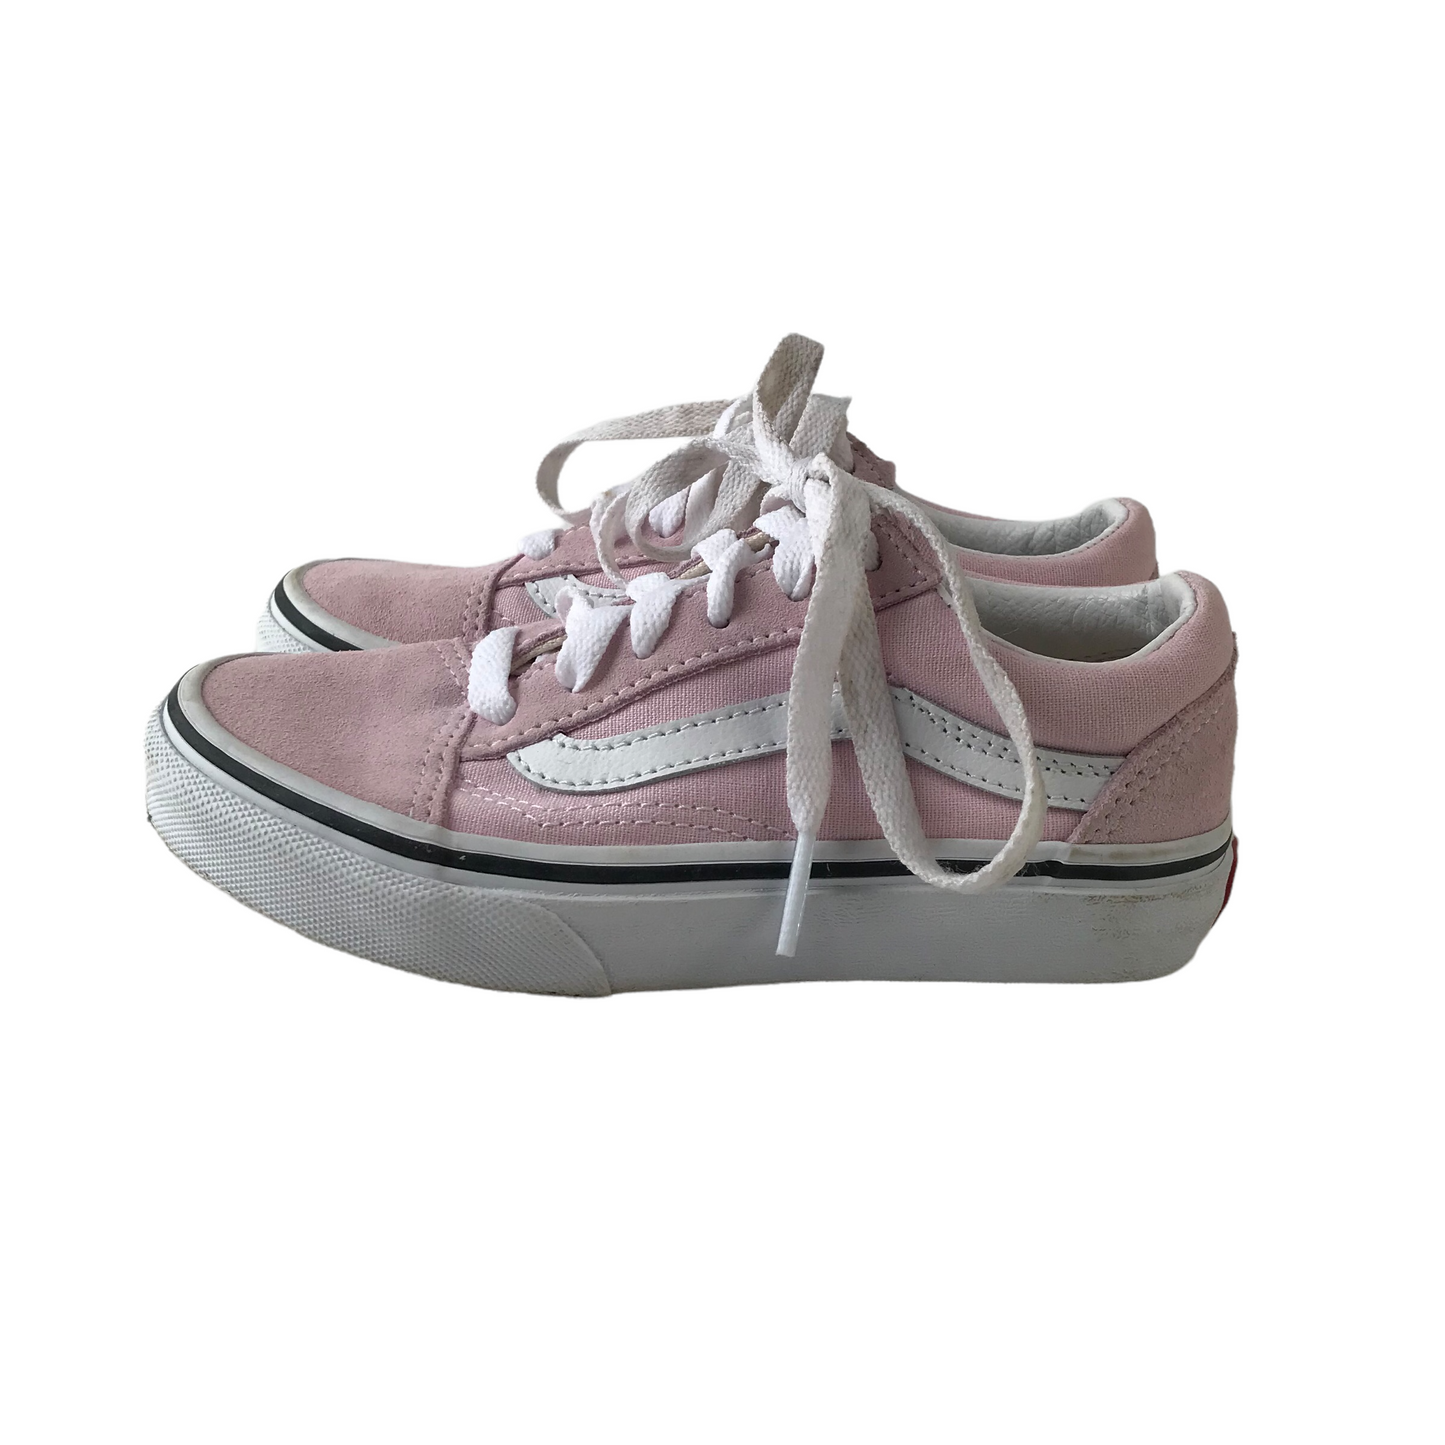 Vans Light Pink Leather Trainers Size UK 11.5 junior